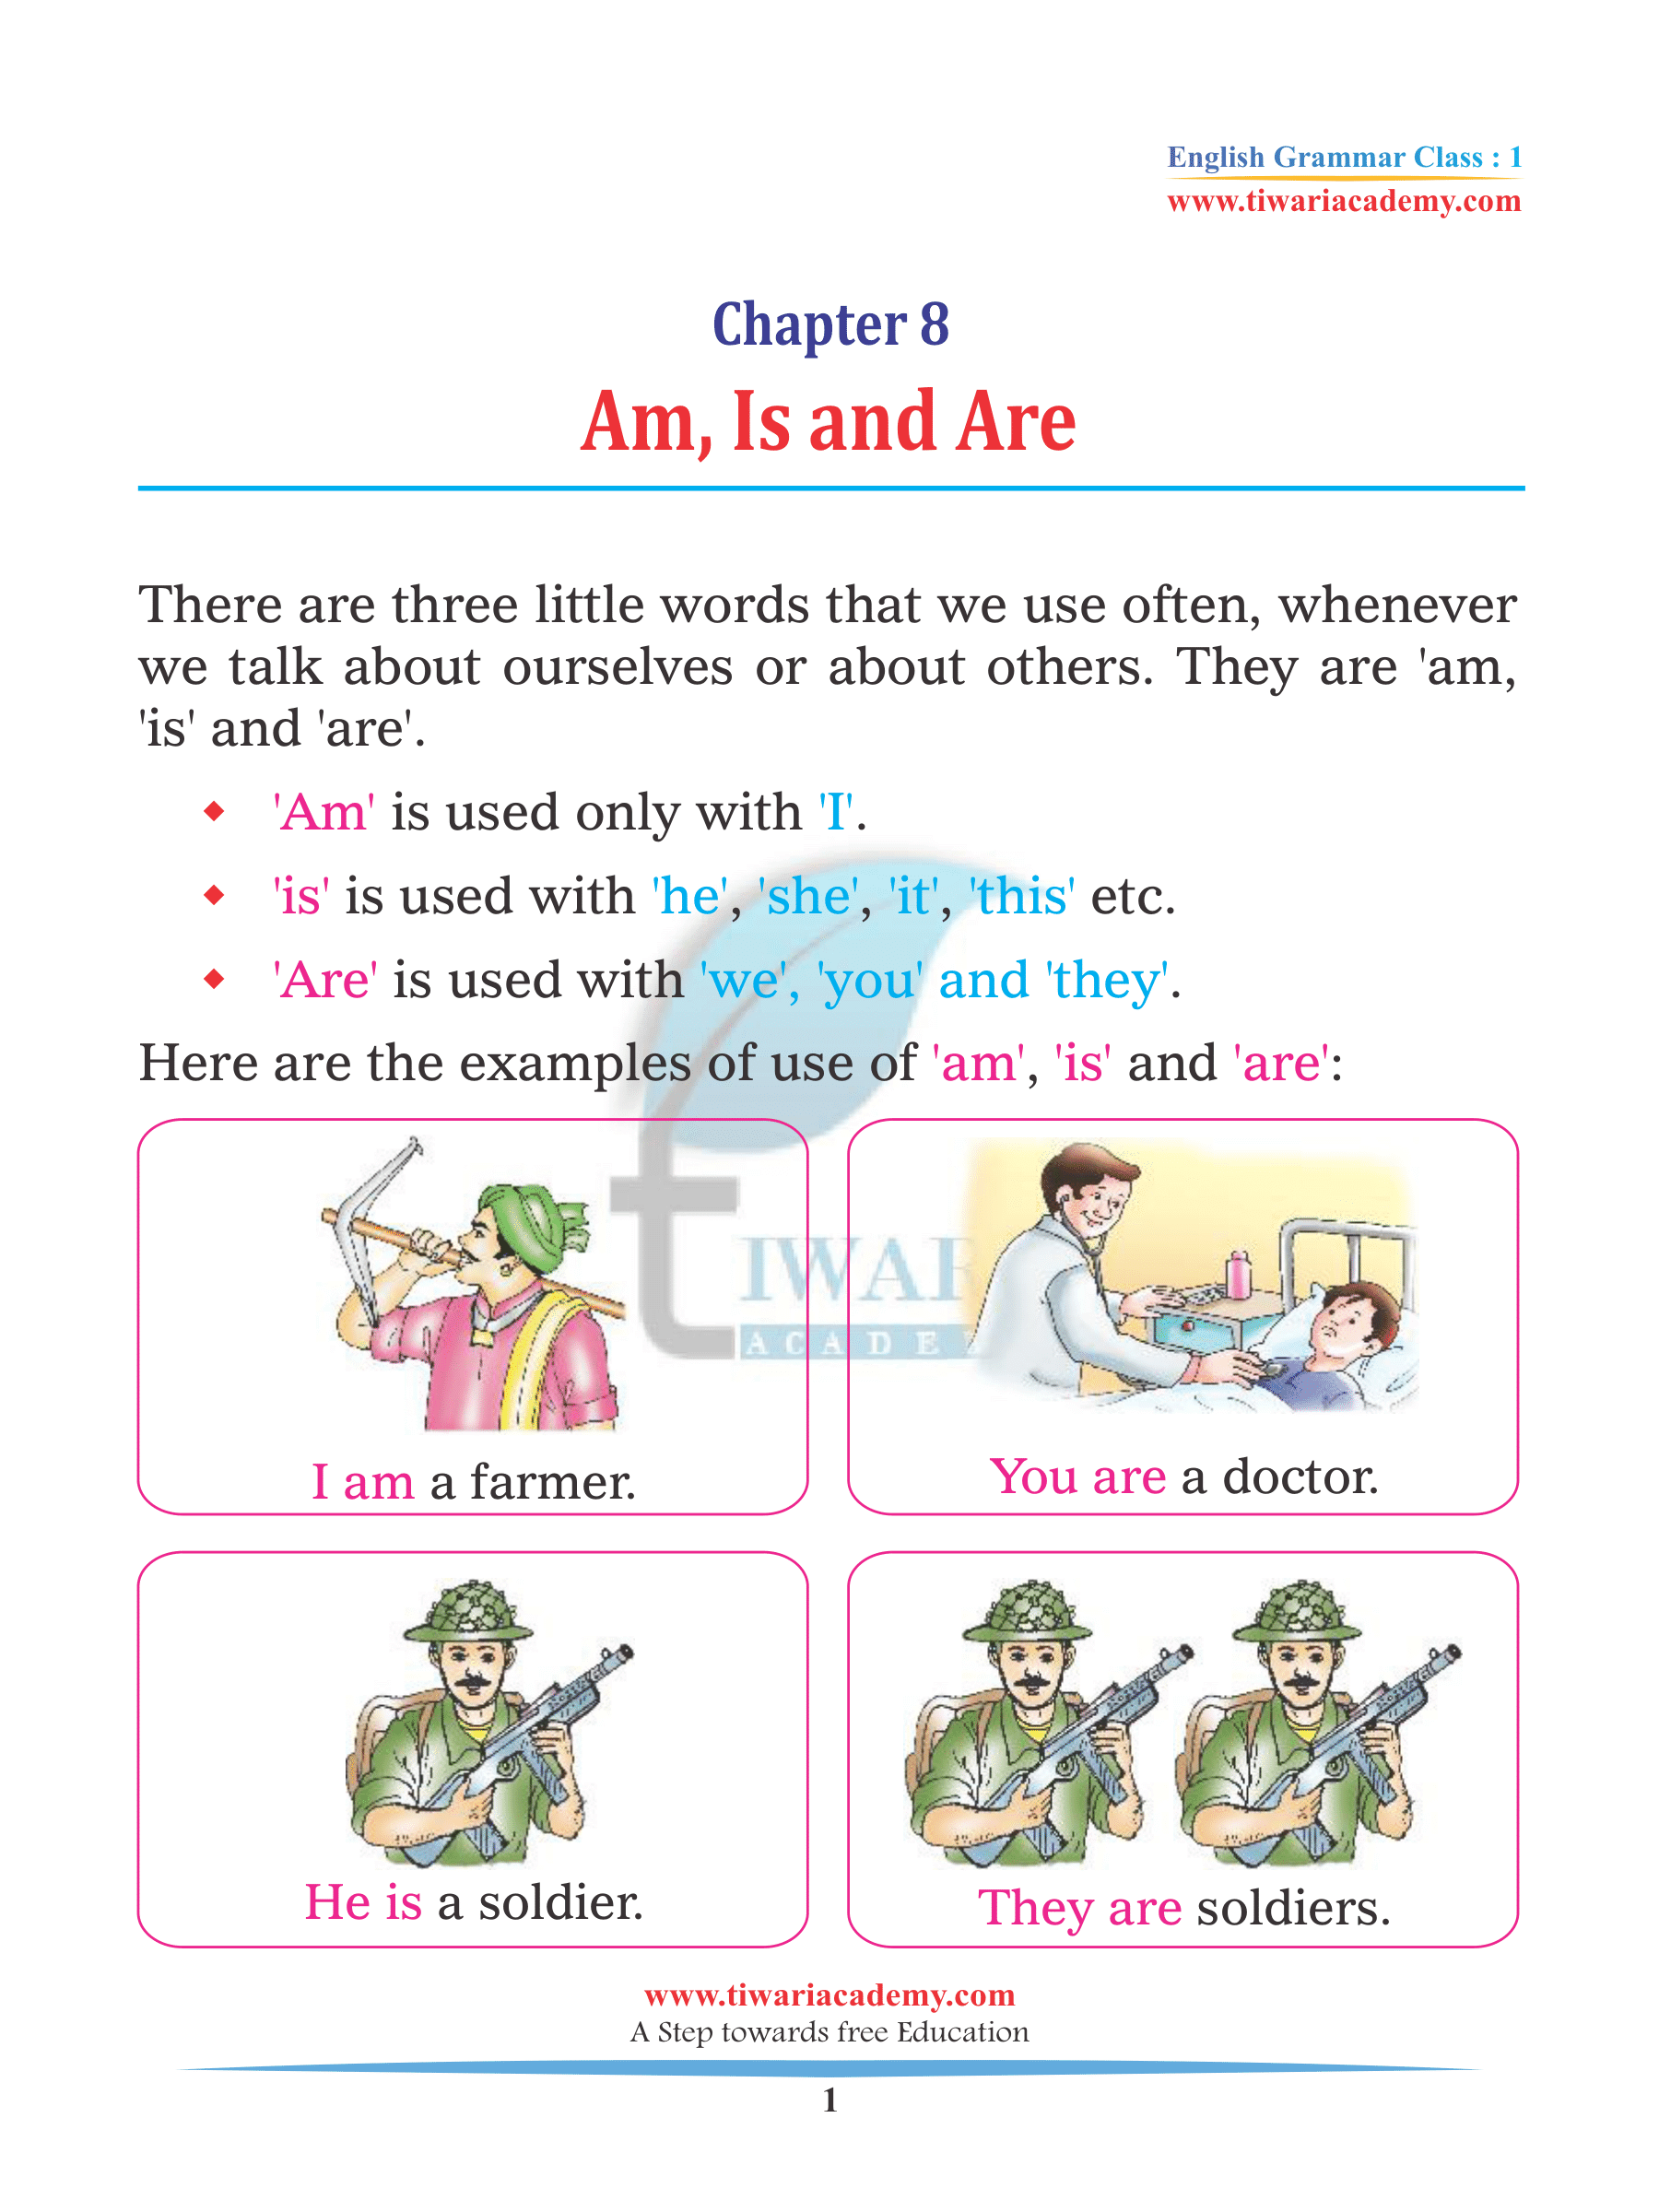 use of Am, Is, and Are for Class 1 Grammar